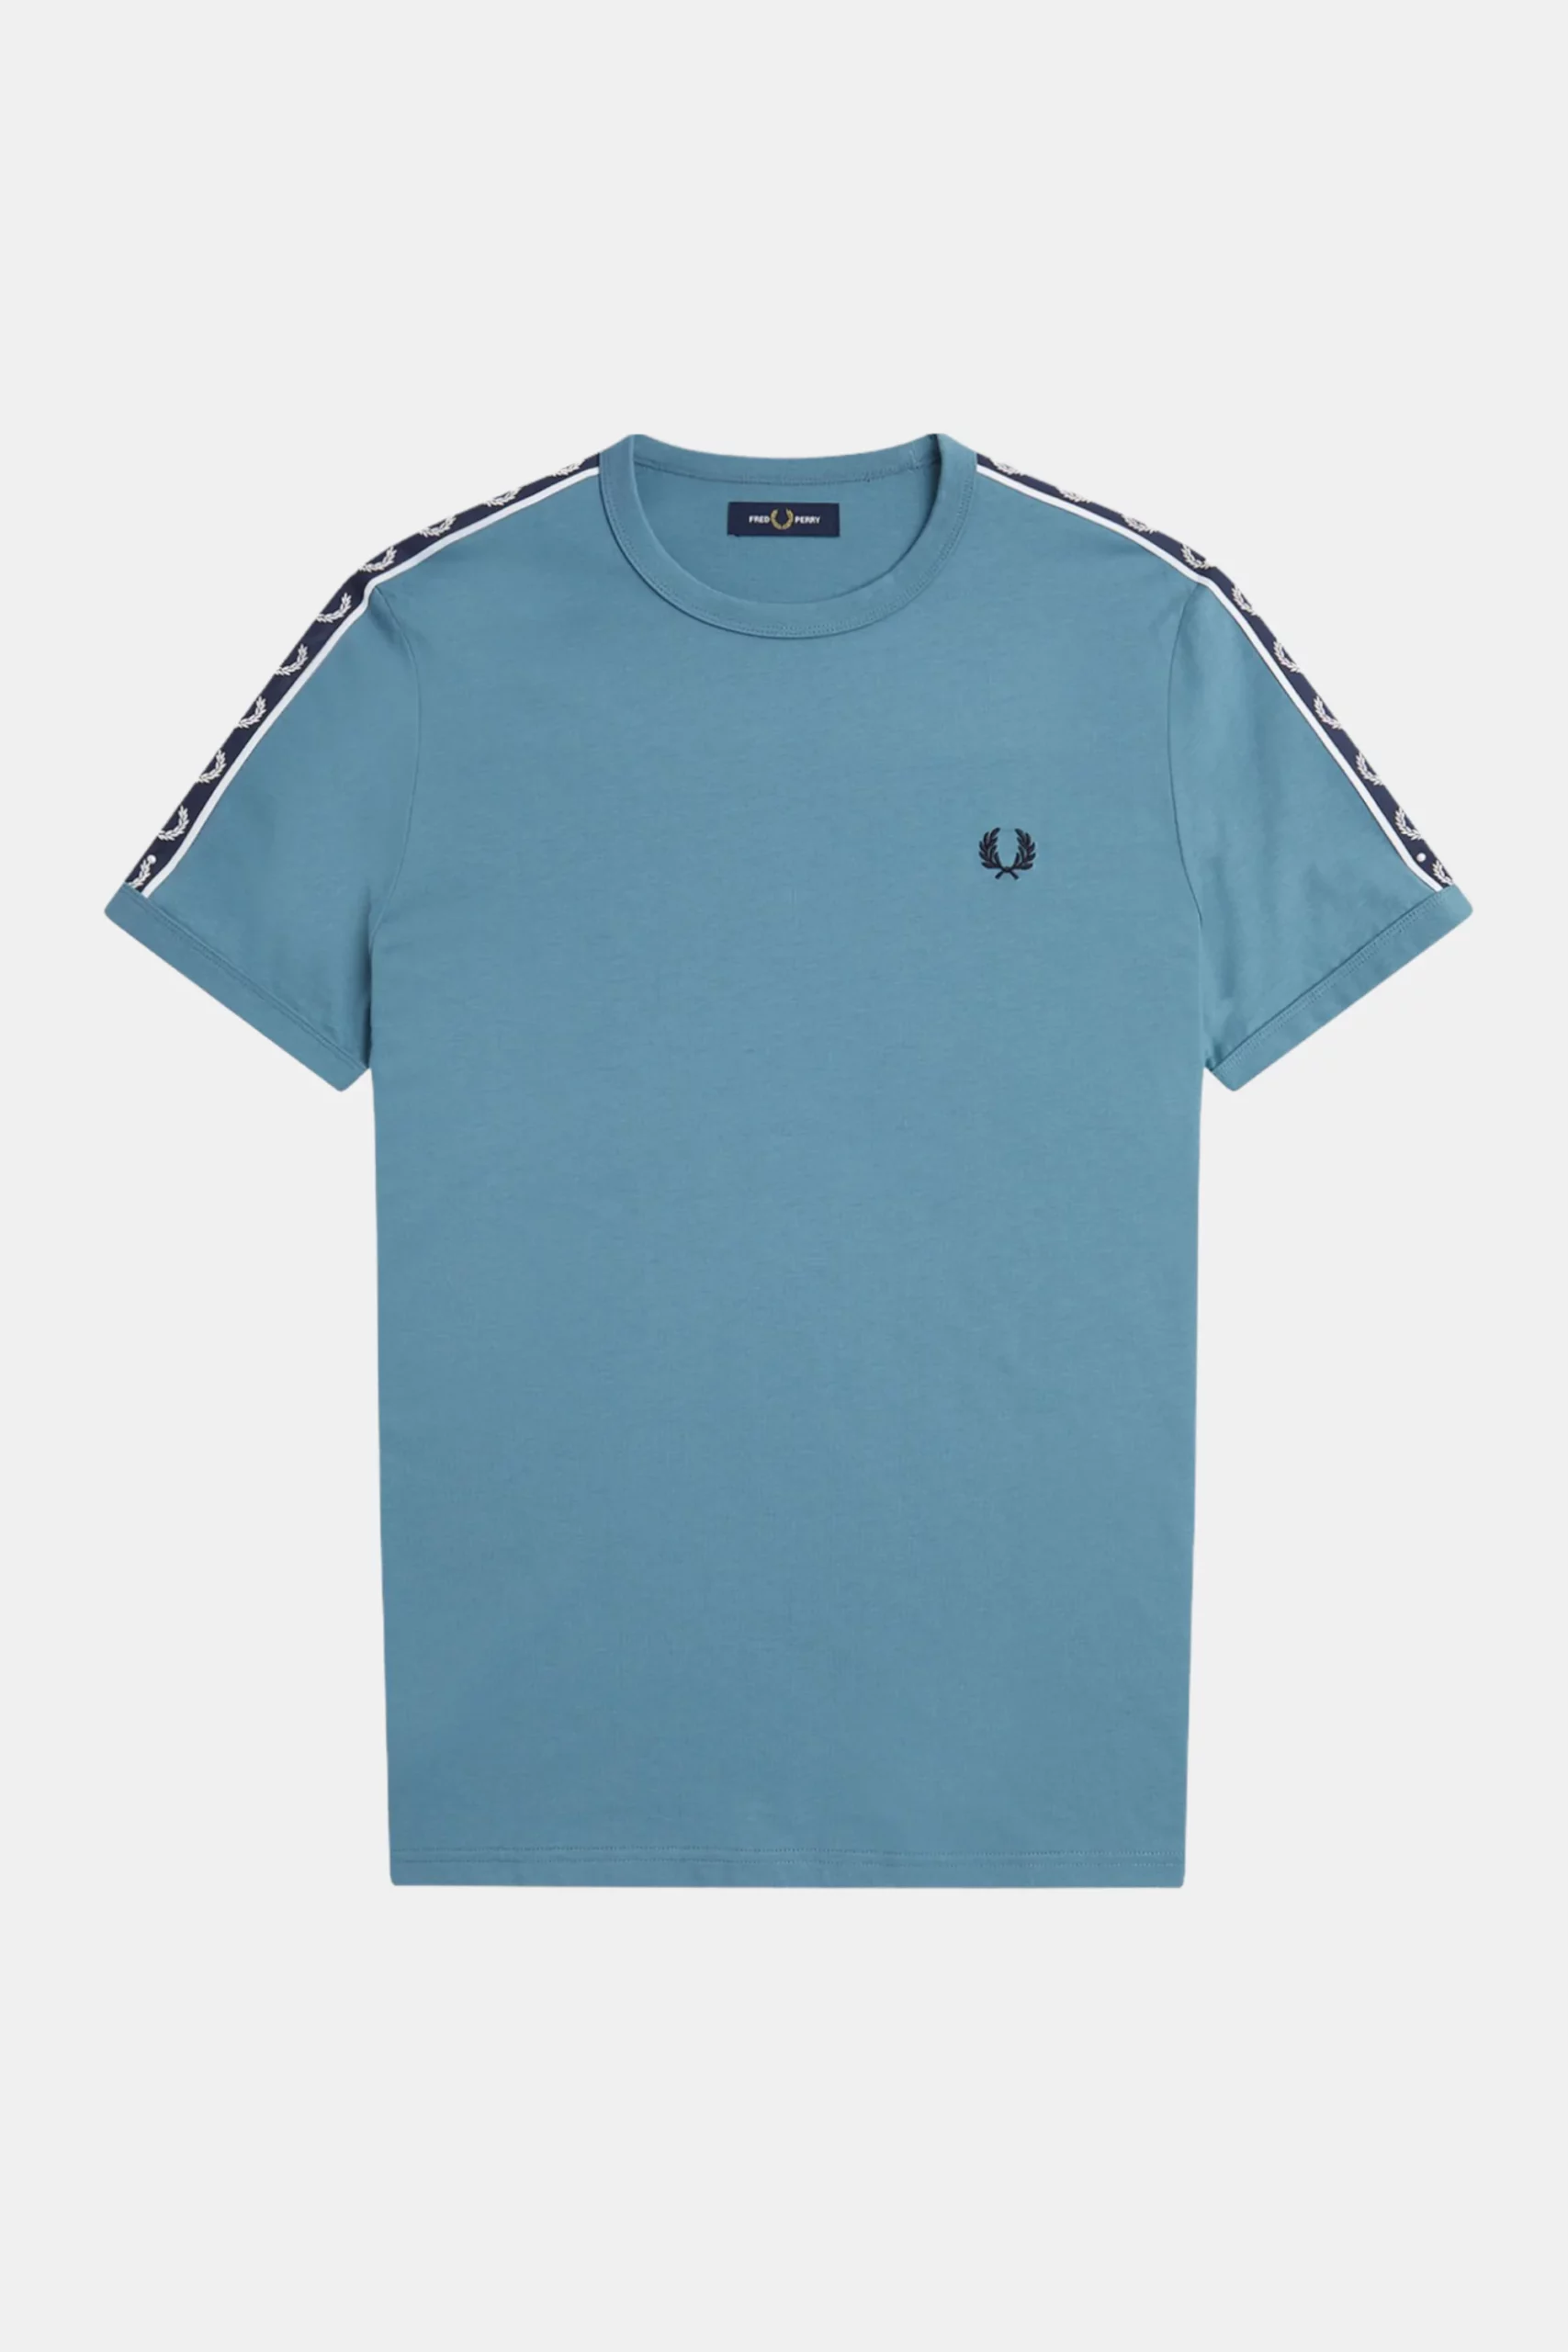 futbolka fred perry contrast tape ringer ash blue navy 1